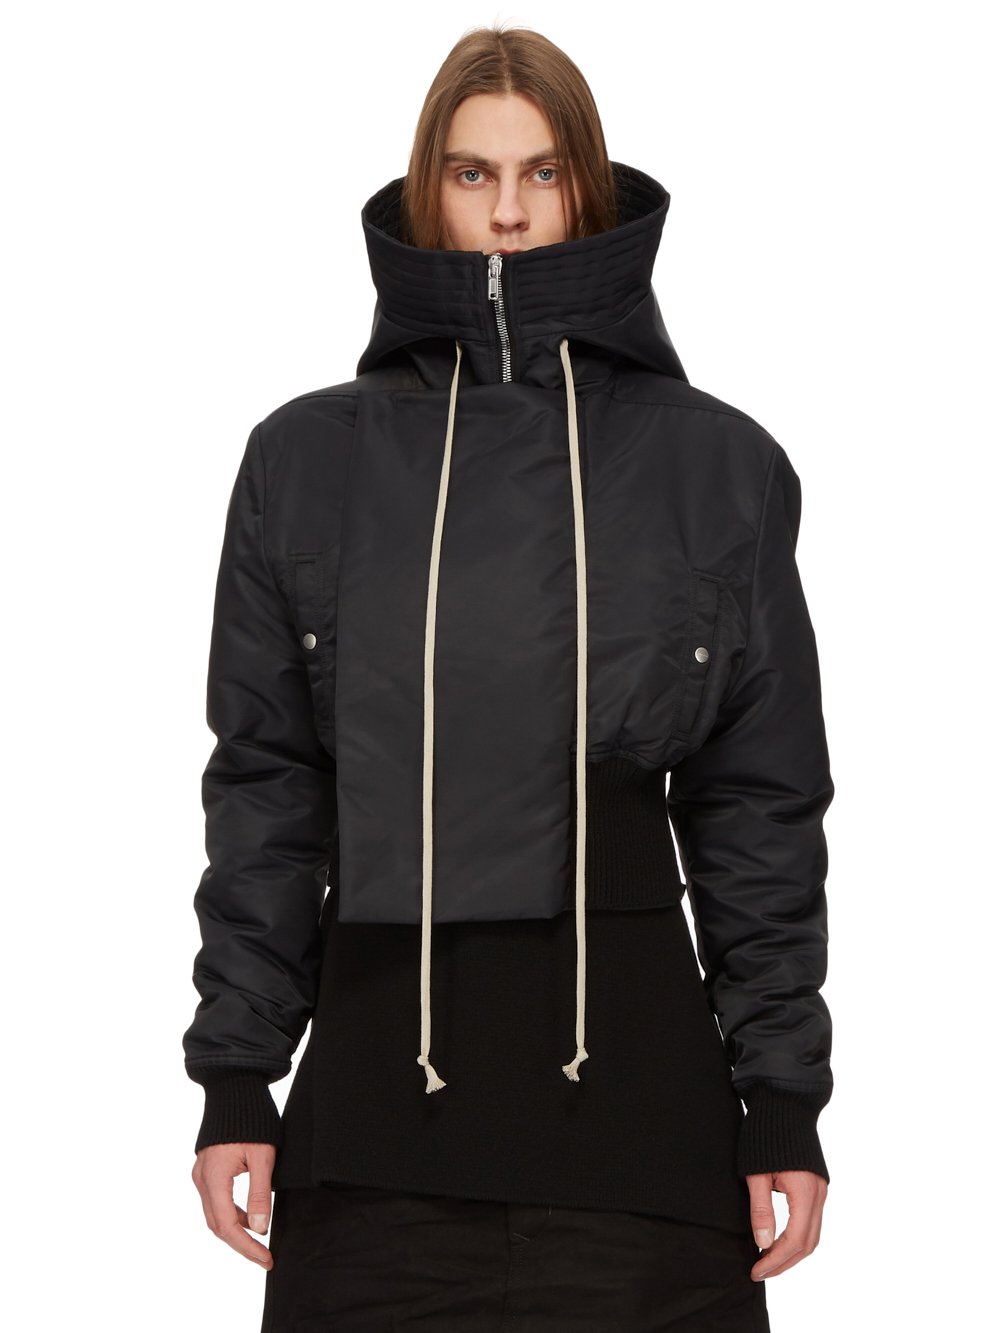 RICK OWENS FW23 LUXOR RUNWAY CROPPED ALICE PARKA IN BLACK RECYCLED BOMBER